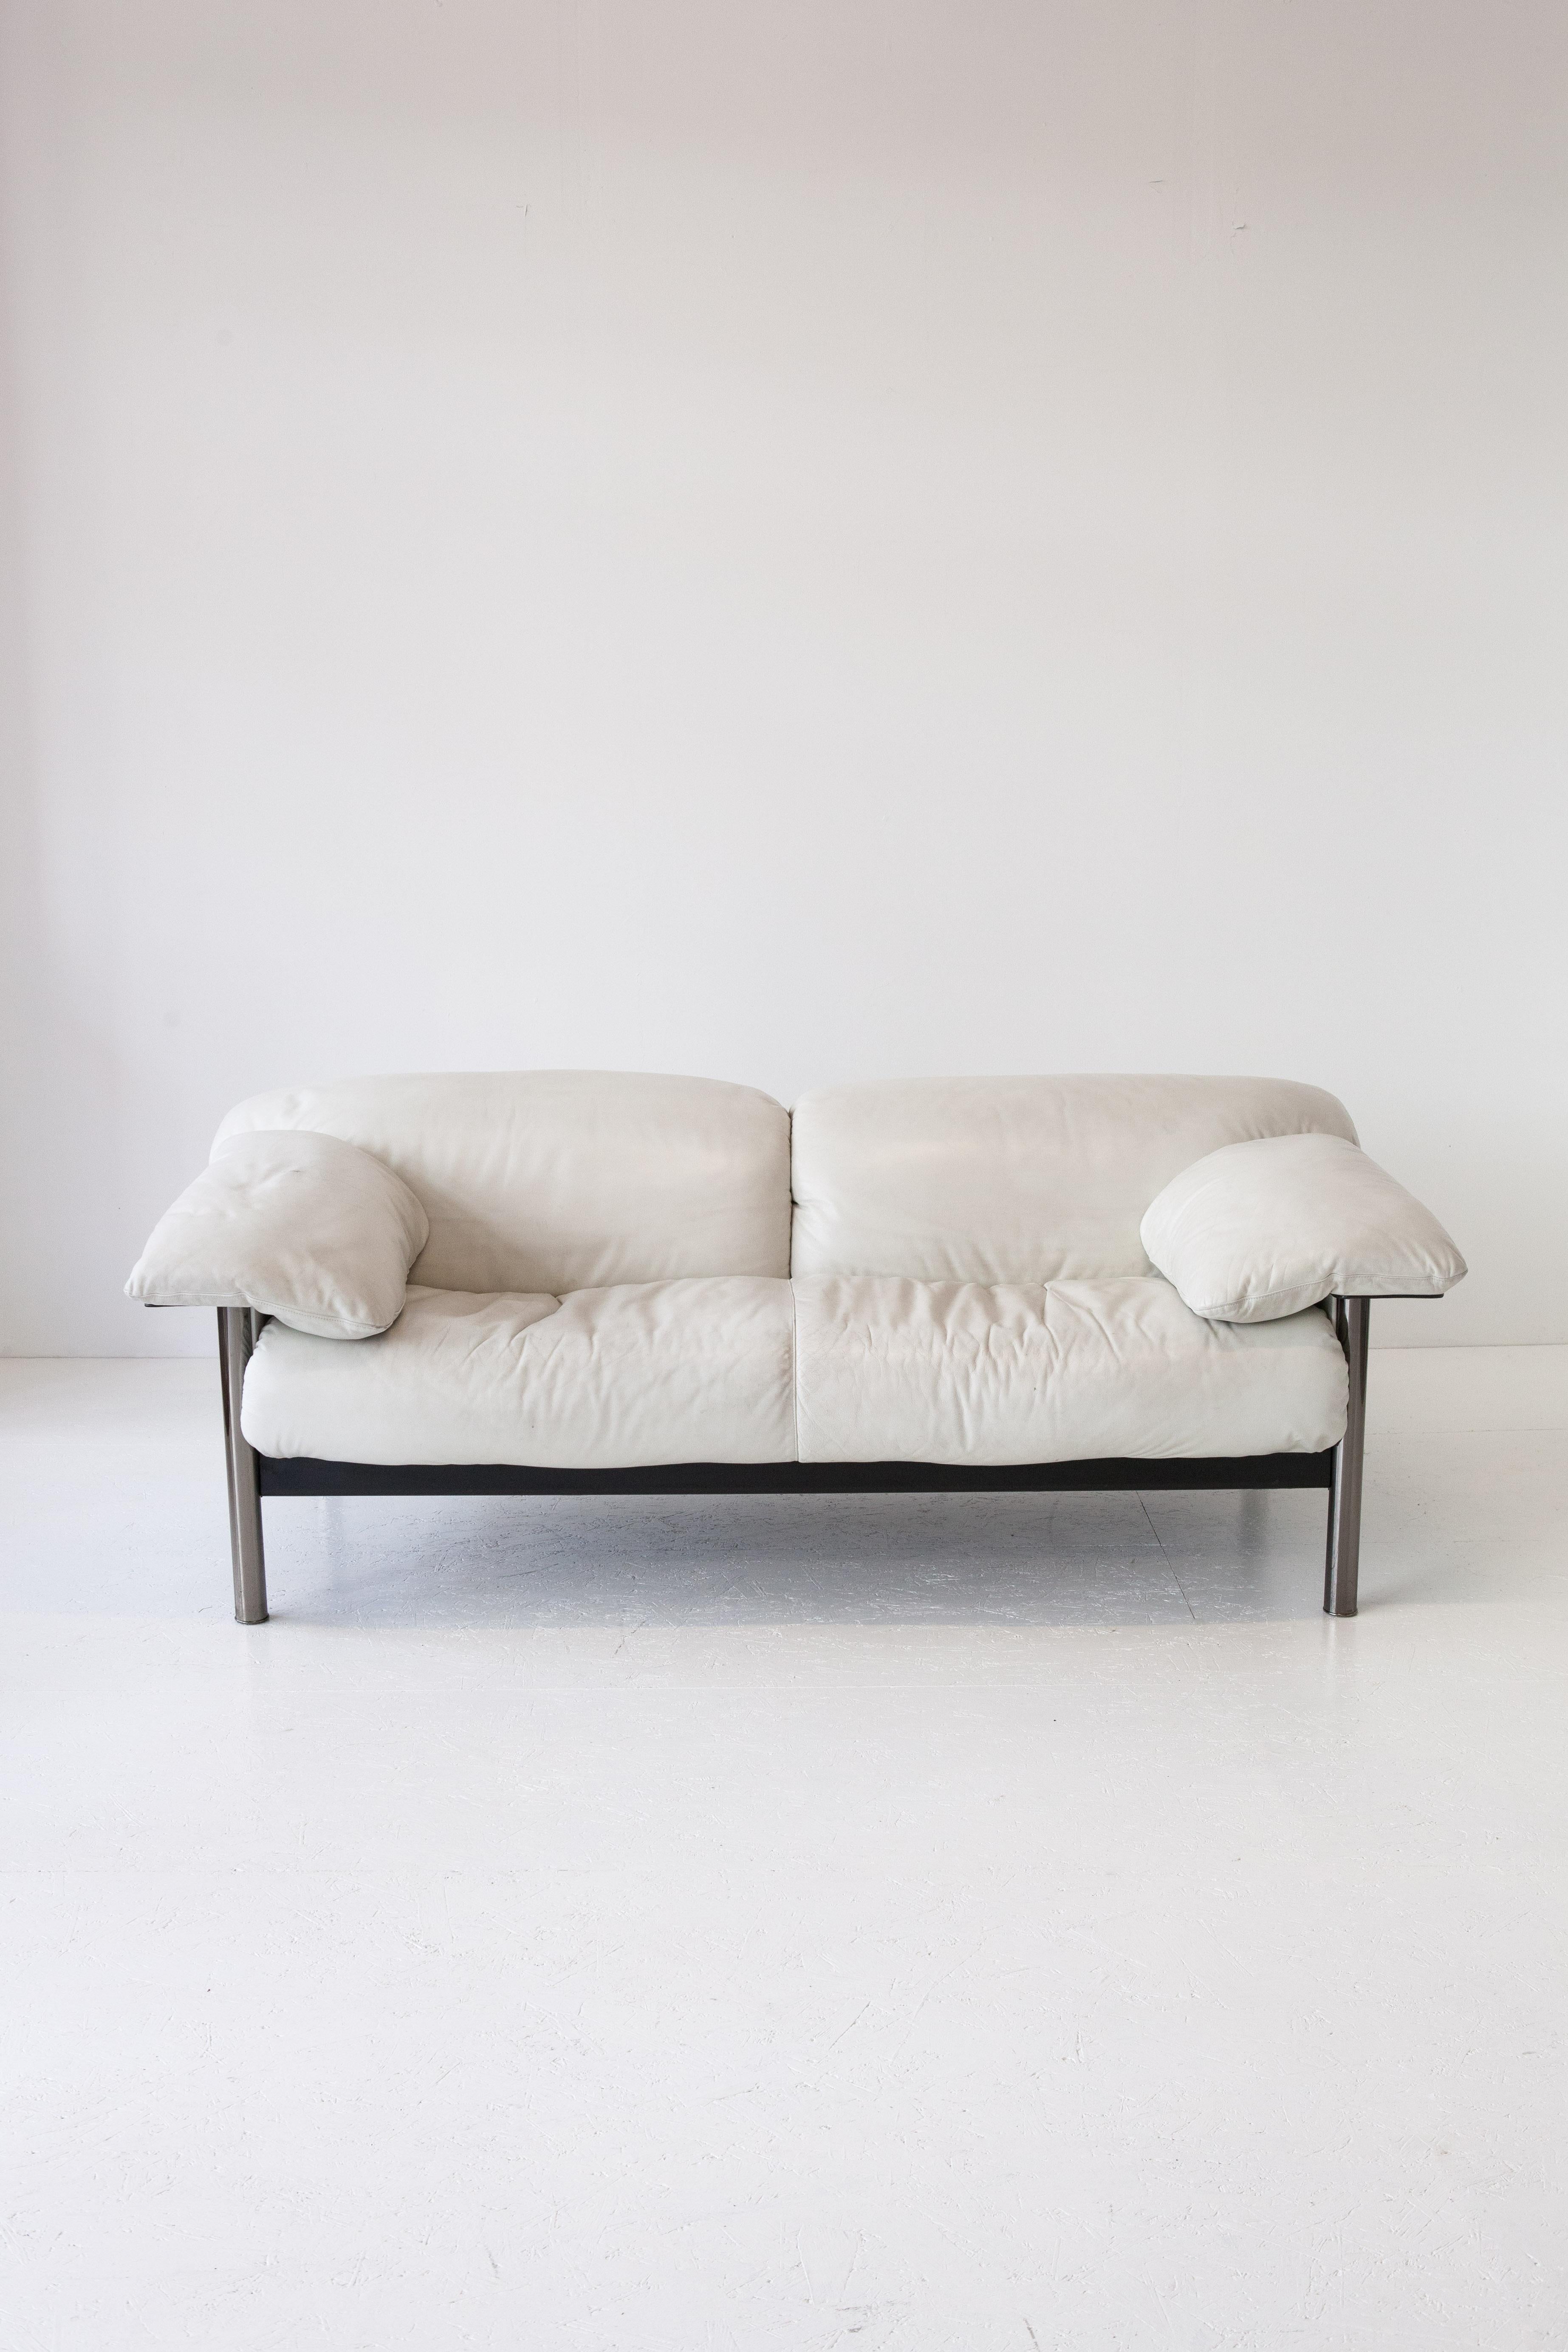 The Pausa sofa was designed in 1986 by Pierluigi Cerri for Poltrona Frau. In its white leather guise, this sofa appears as an early morning misty cloud floating above the earth. 

Originally both back rests could be adjusted upright, but the system